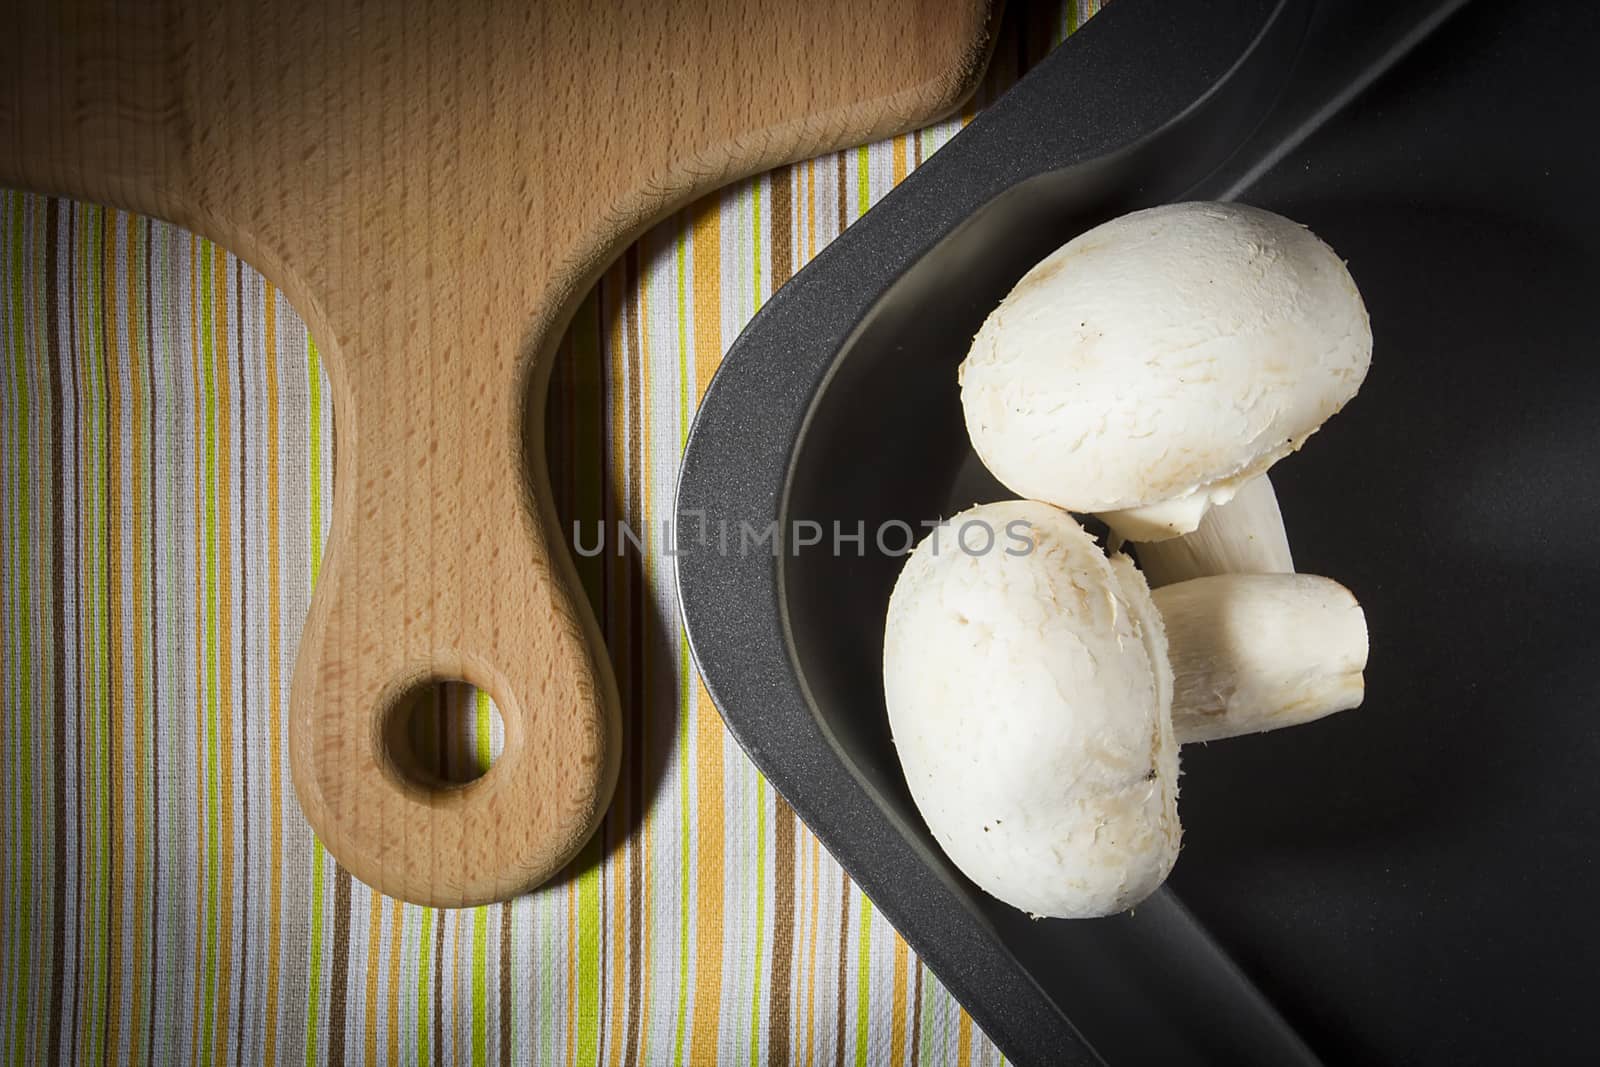 Champignon mushrooms on a baking sheet and a cutting board on the kitchen table